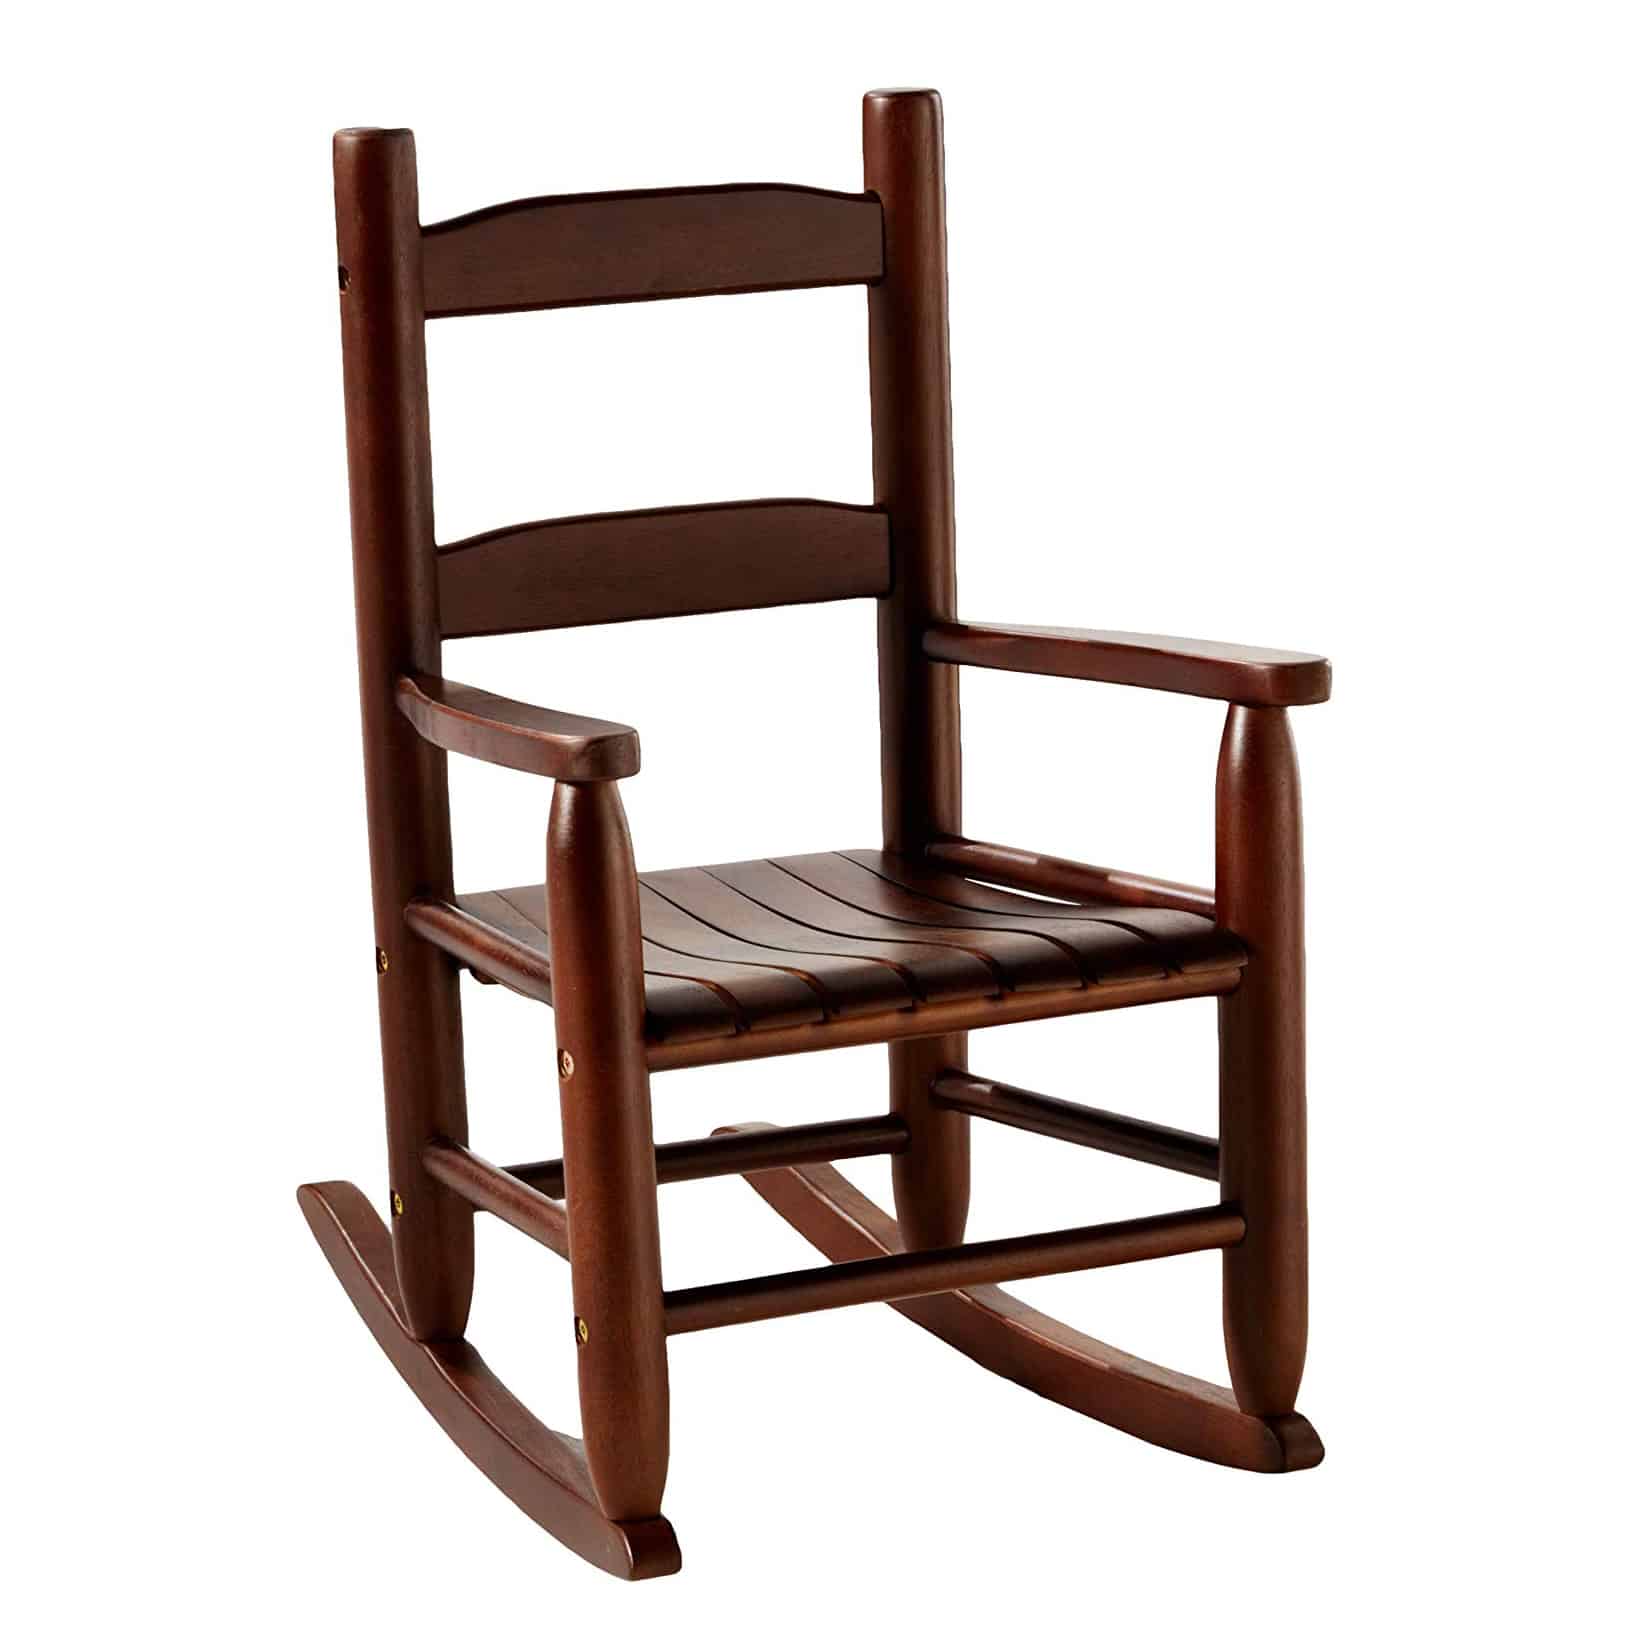 Top 10 Best Childs Rocking Chair in 2022 Reviews | Buyer's Guide